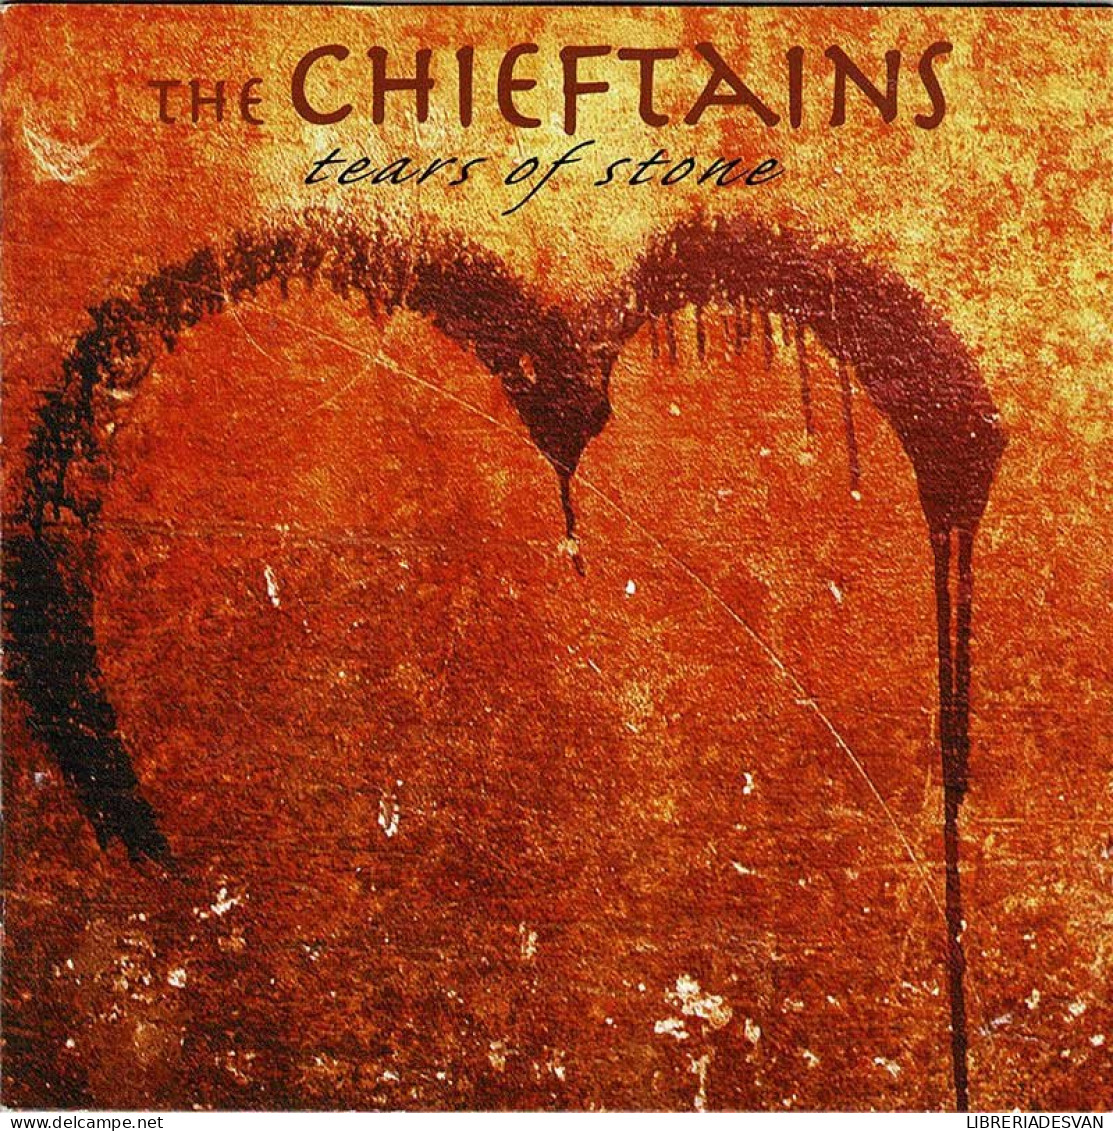 The Chieftains - Tears Of Stone. CD - Country Y Folk